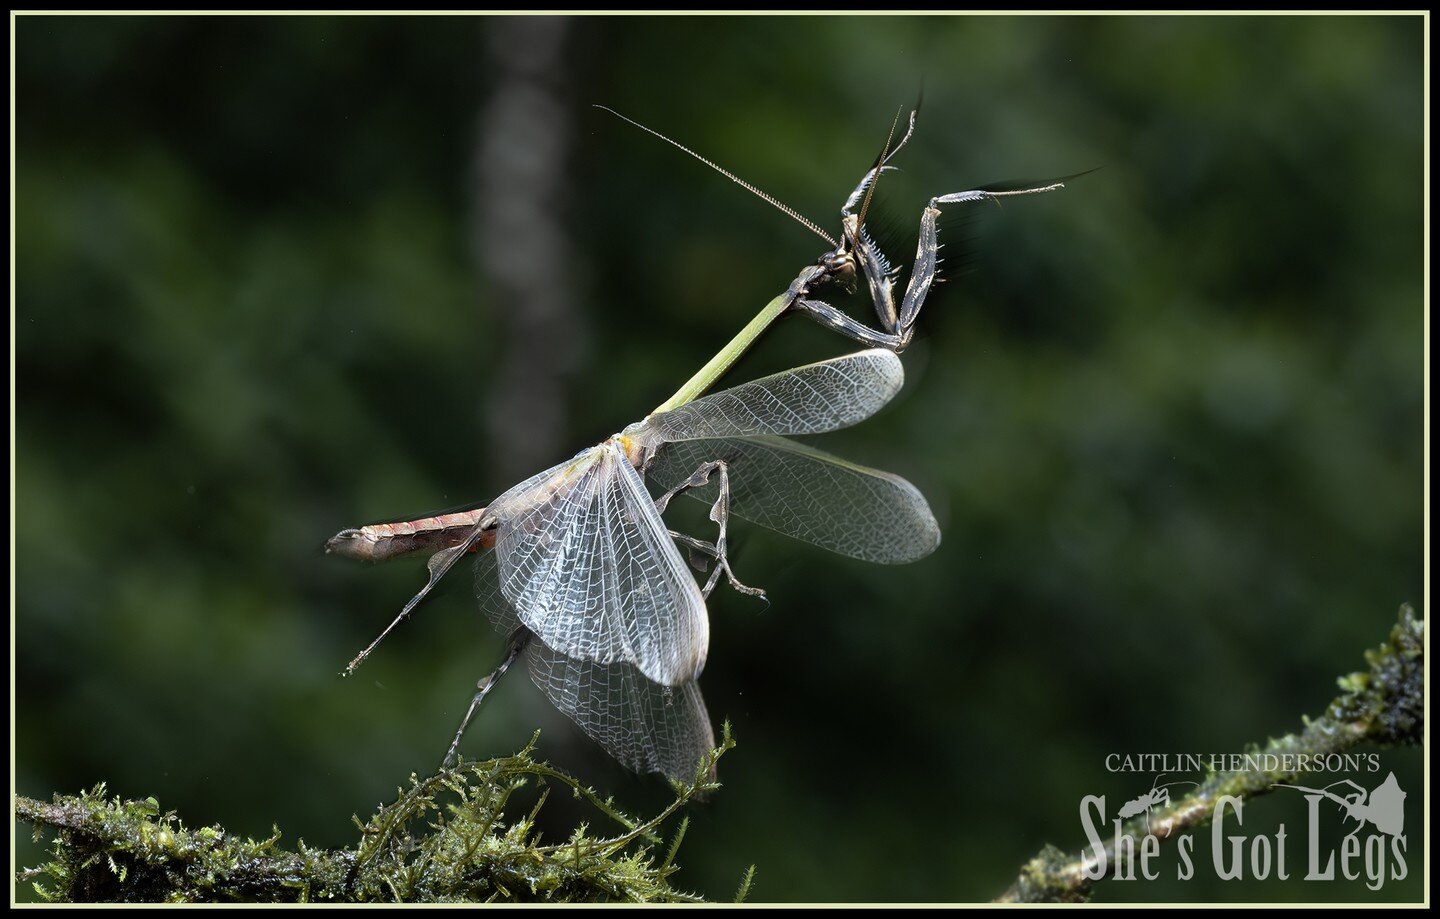 Three &hellip; two &hellip; one &hellip; LIFTOFF 🚀 

This is a praying mantis in flight! 

Mantises, if you see them at all, are usually spotted hanging out in the bushes kind of eyeing us off like they&rsquo;re wondering if they can fit us in their